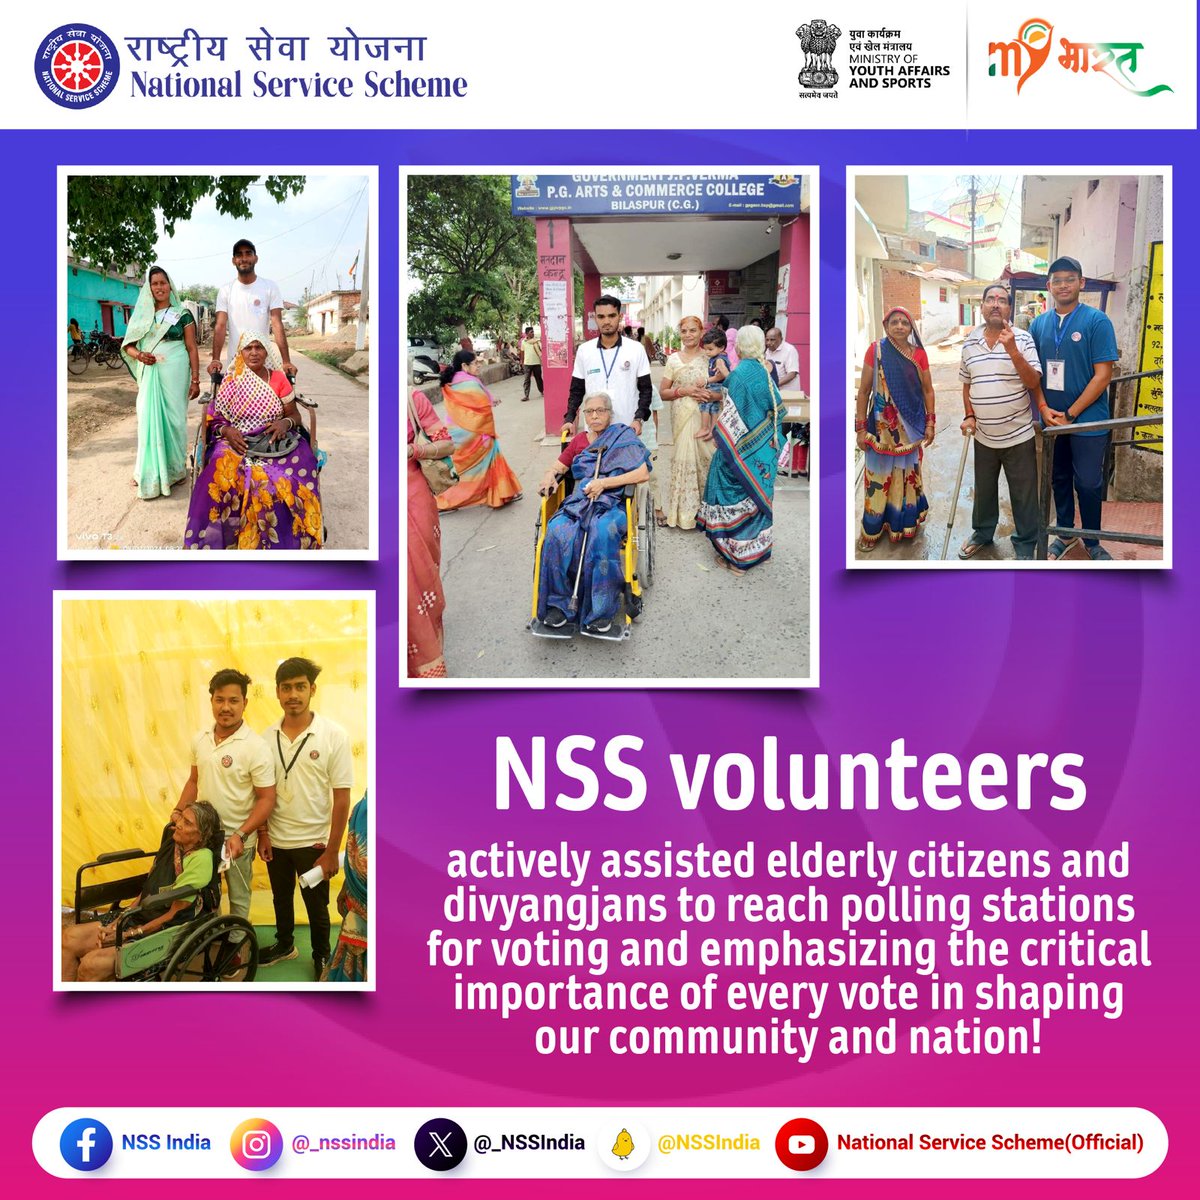 Our dedicated NSS volunteers are on the ground, ensuring that every citizen, including the elderly can exercise their right to vote. Their commitment highlights the vital role of community service in fostering inclusivity and democracy! #voterawareness #MeraPehlaVoteDeshKeLiye